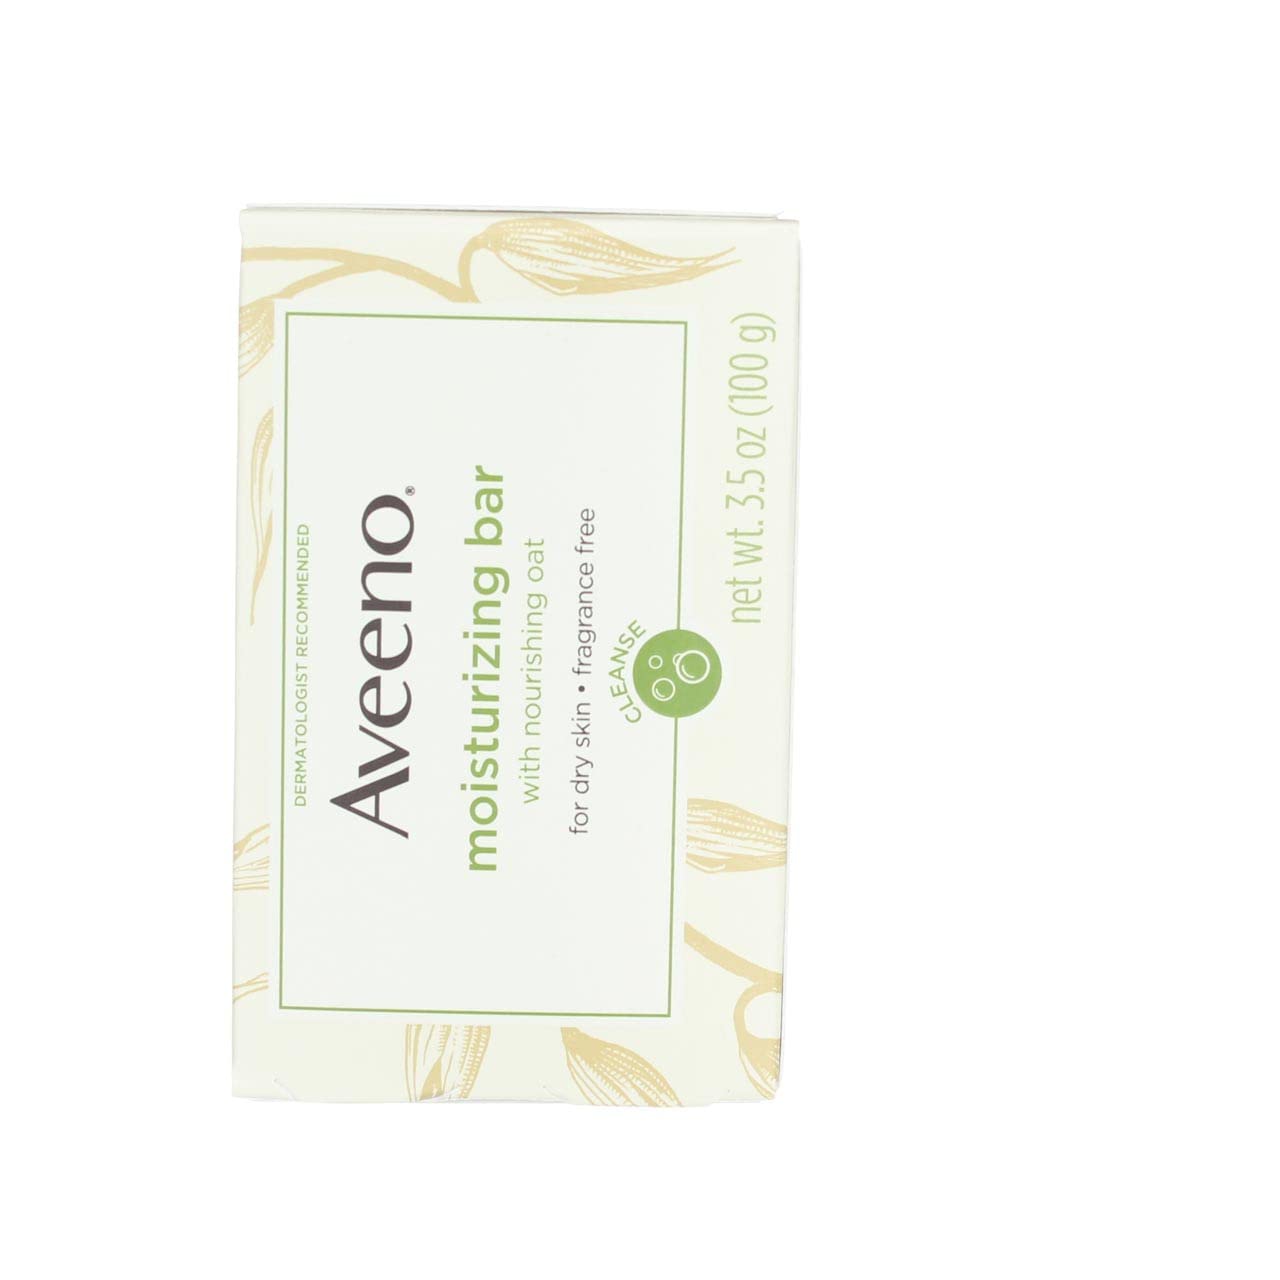 Aveeno Moisturizing Bar with Natural Colloidal Oatmeal for Dry Skin, Fragrance Free, 3.5 Oz (2 Pack)